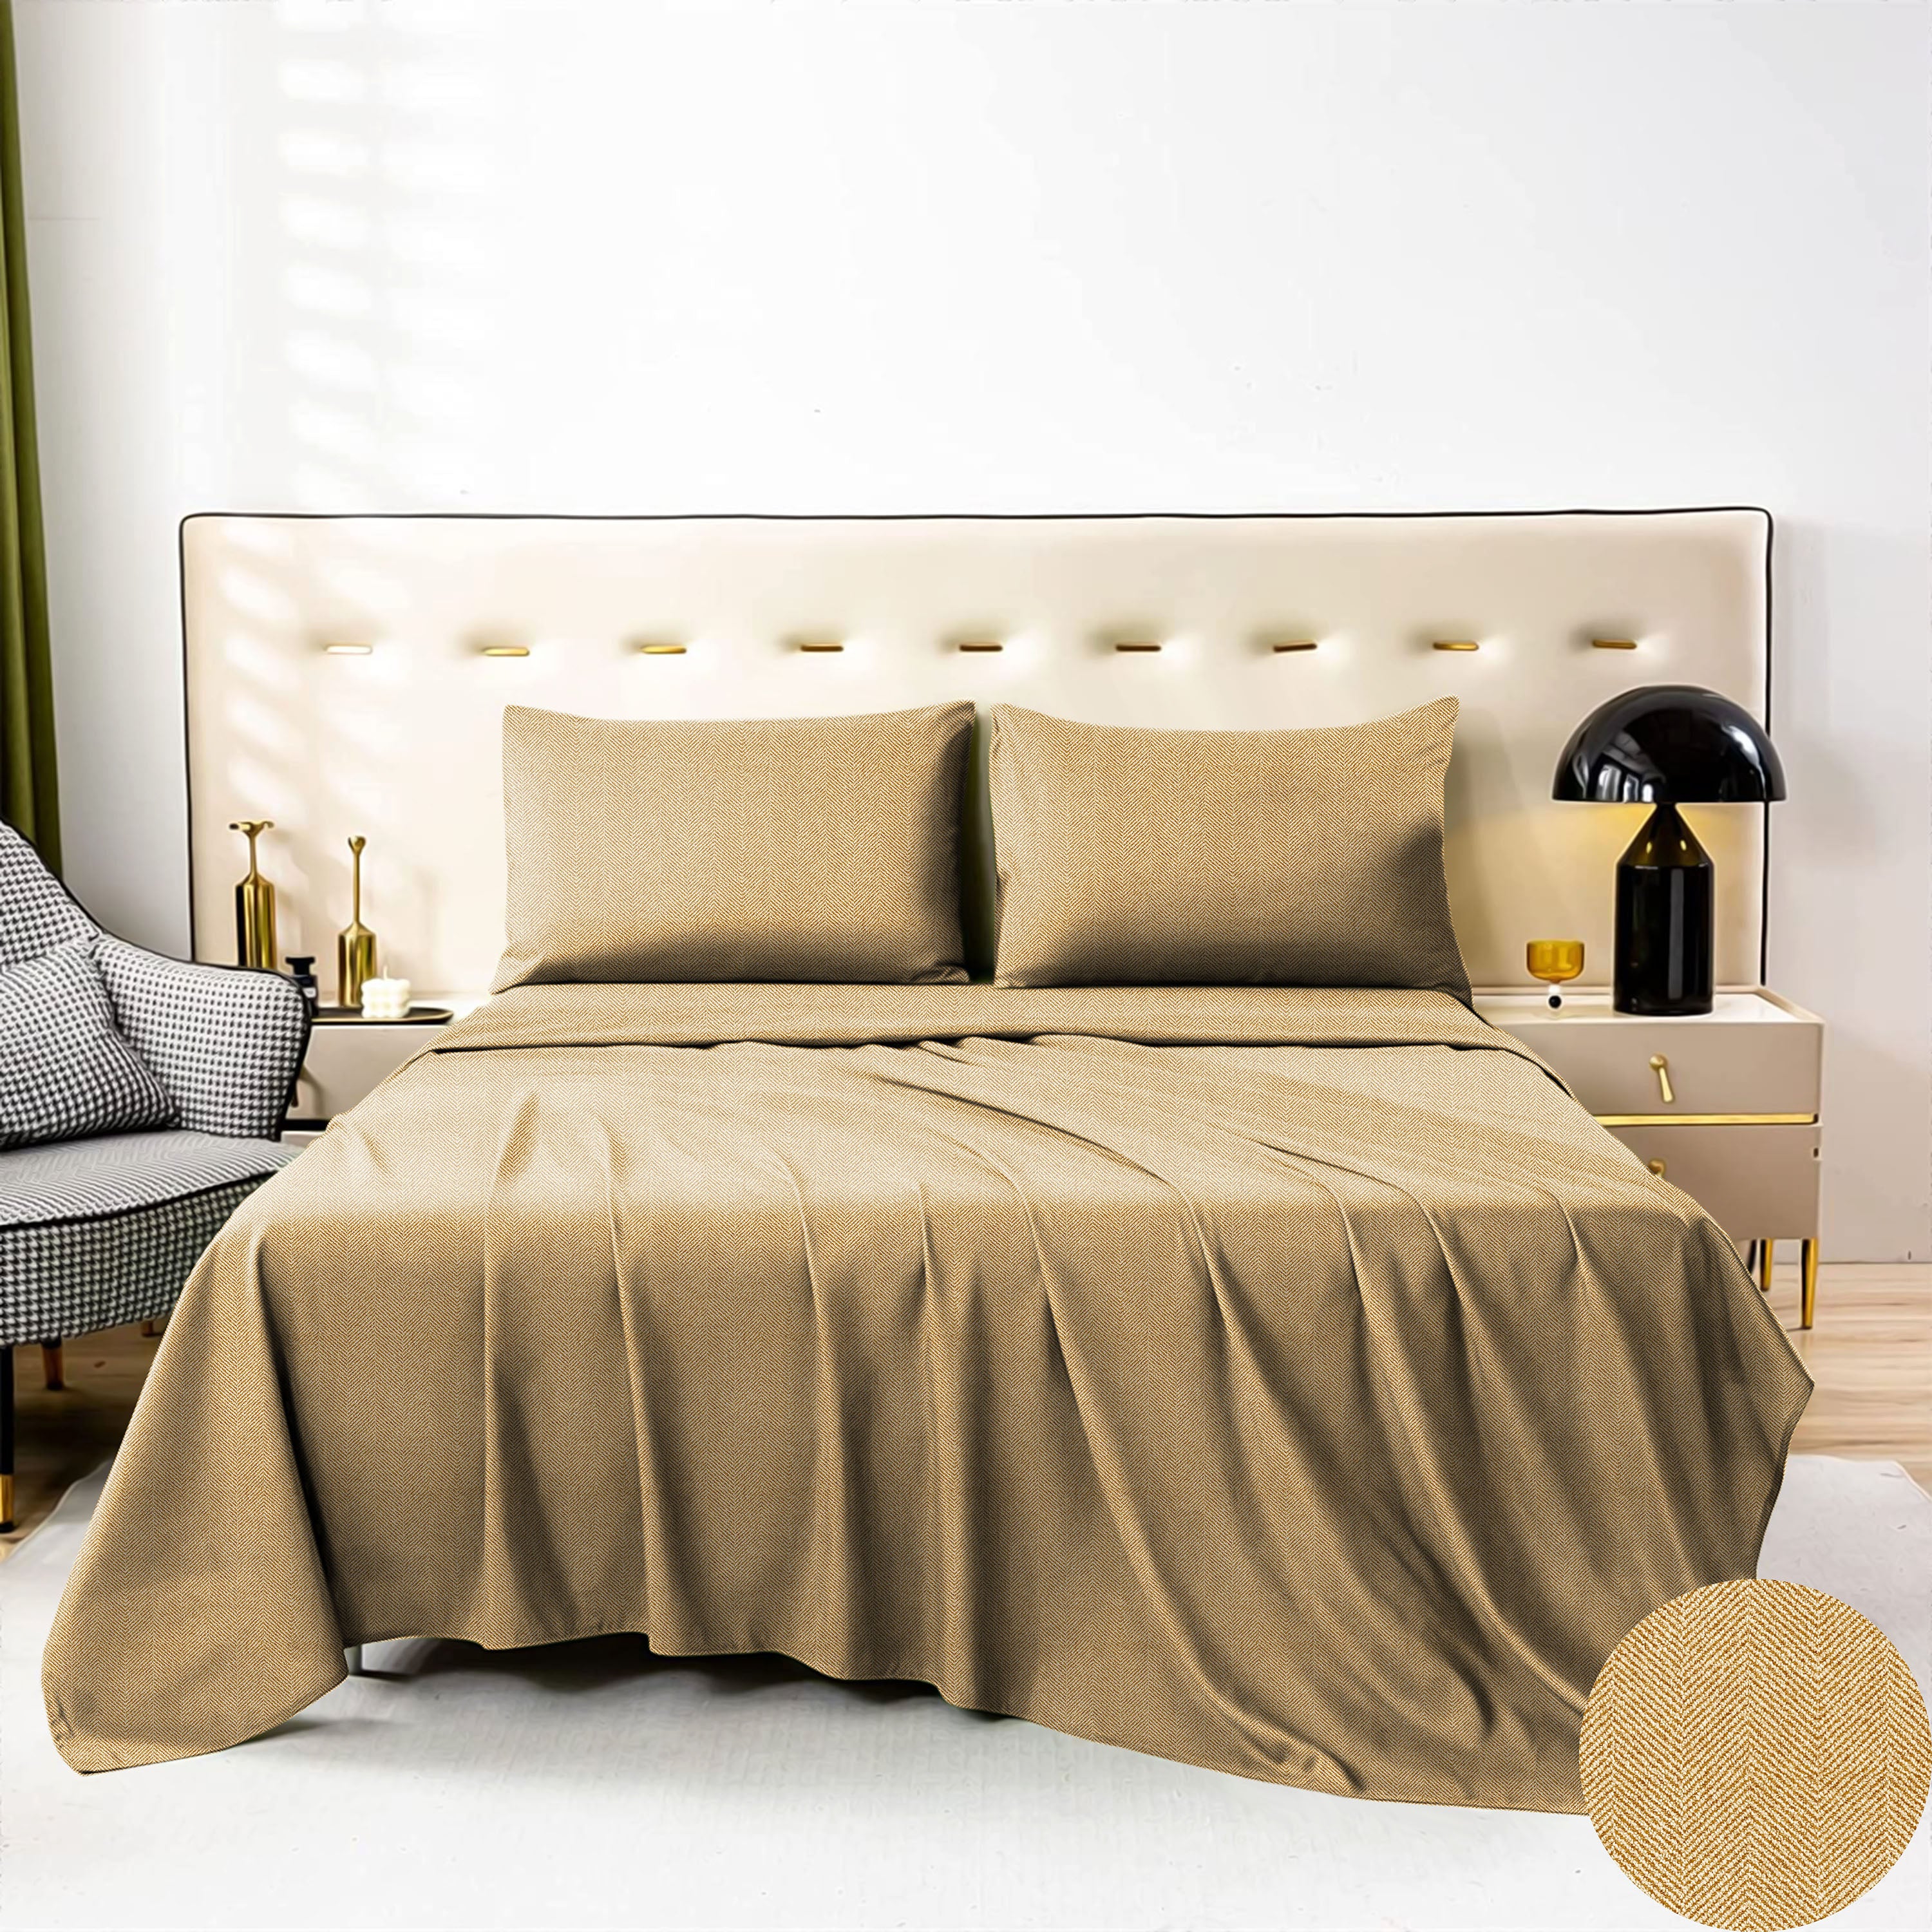 Herringbone Mustard Bedcover for Double Bed with 2 PillowCovers King Size (104" X 90")